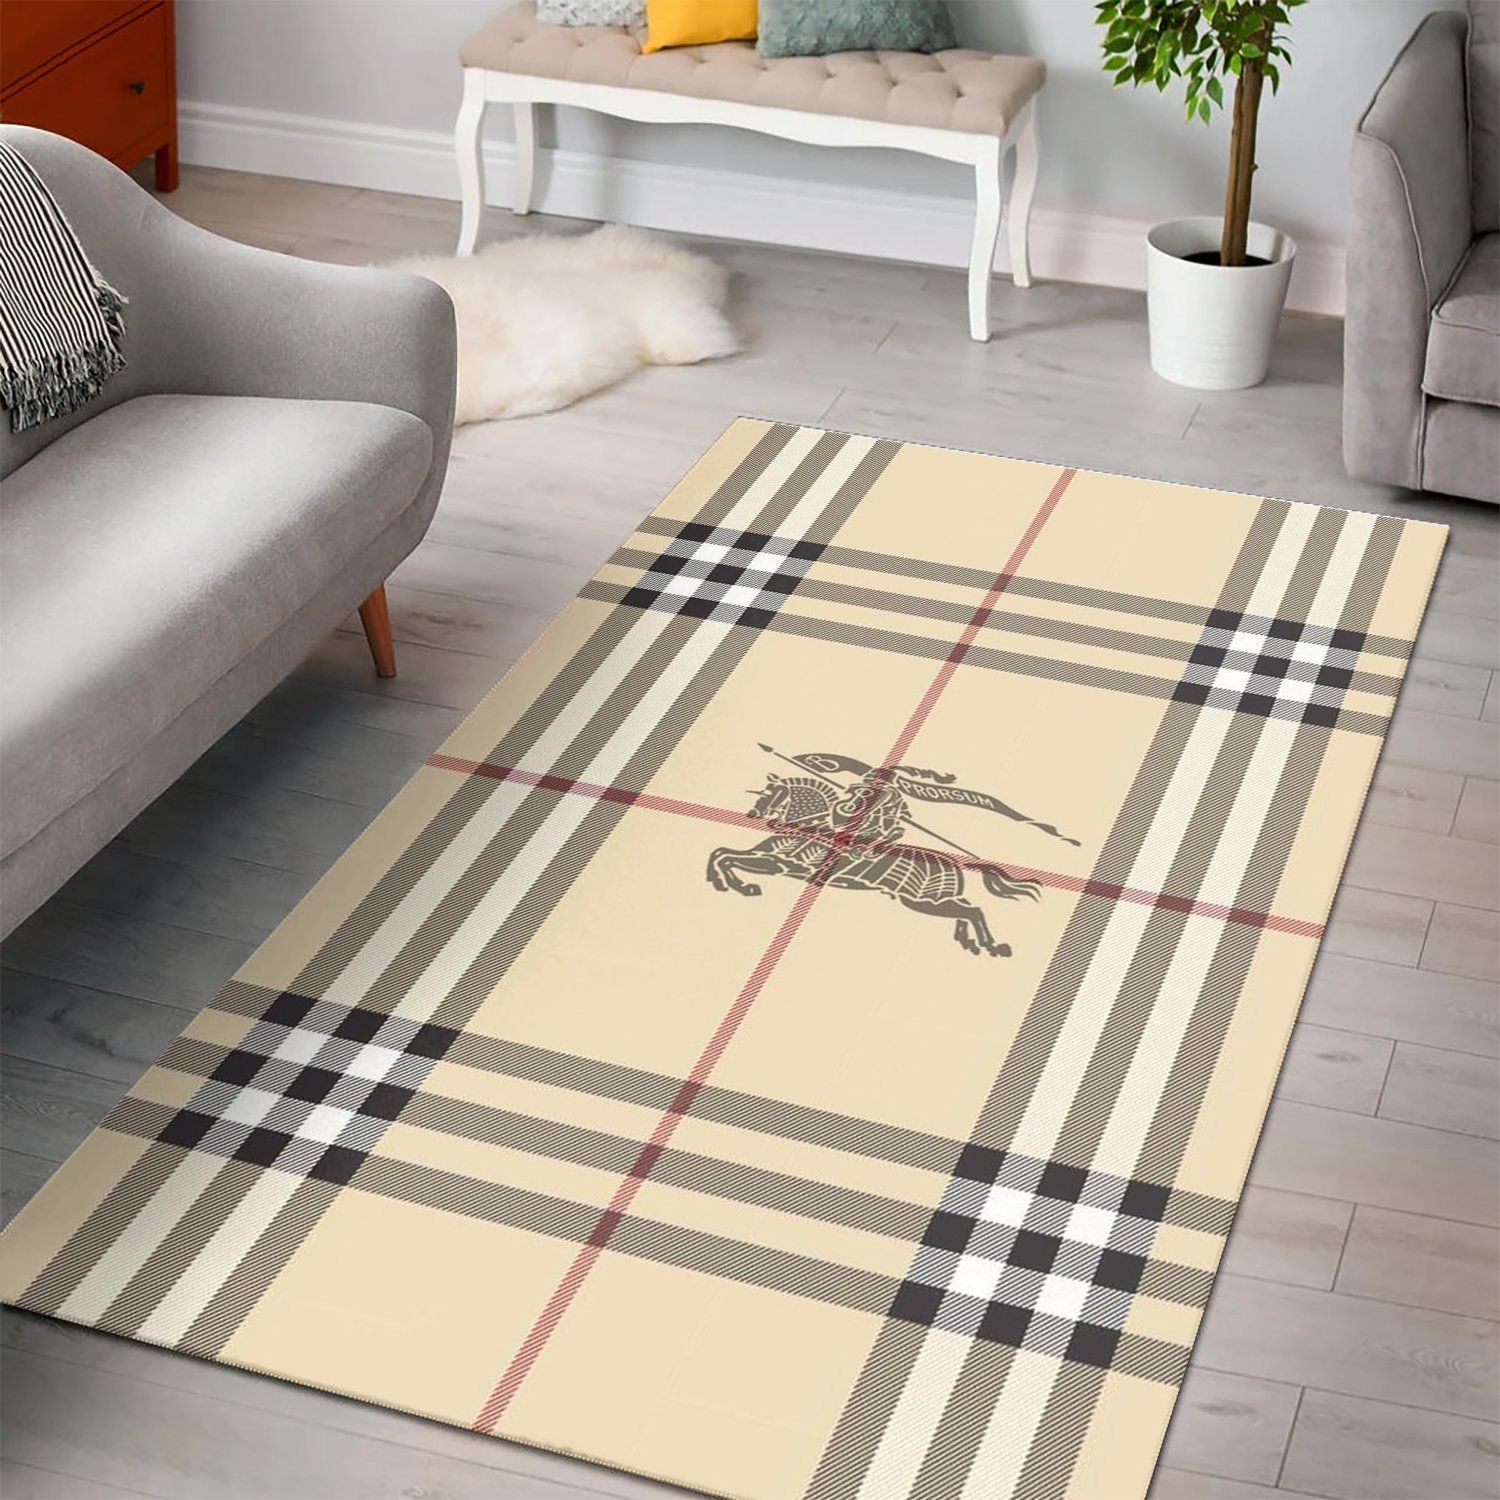 Burberry Luxury Brand 22 Area Rug Living Room And Bedroom Rug Us Gift Decor VH3